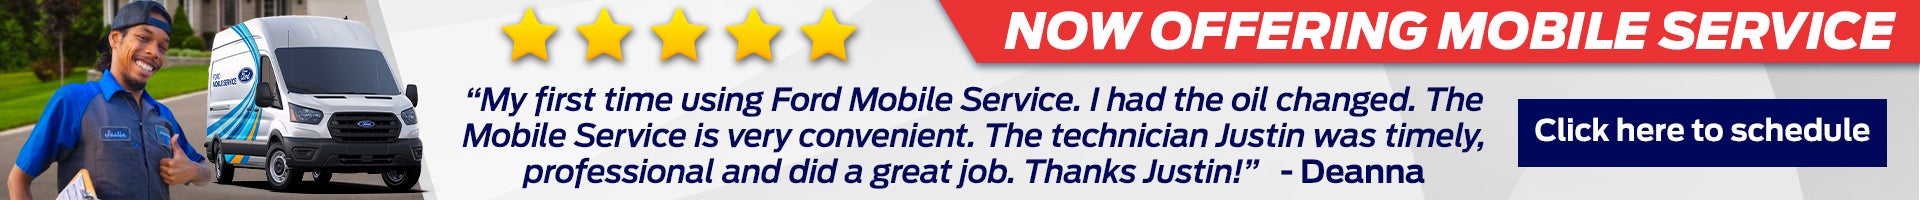 Call to schedule mobile service!